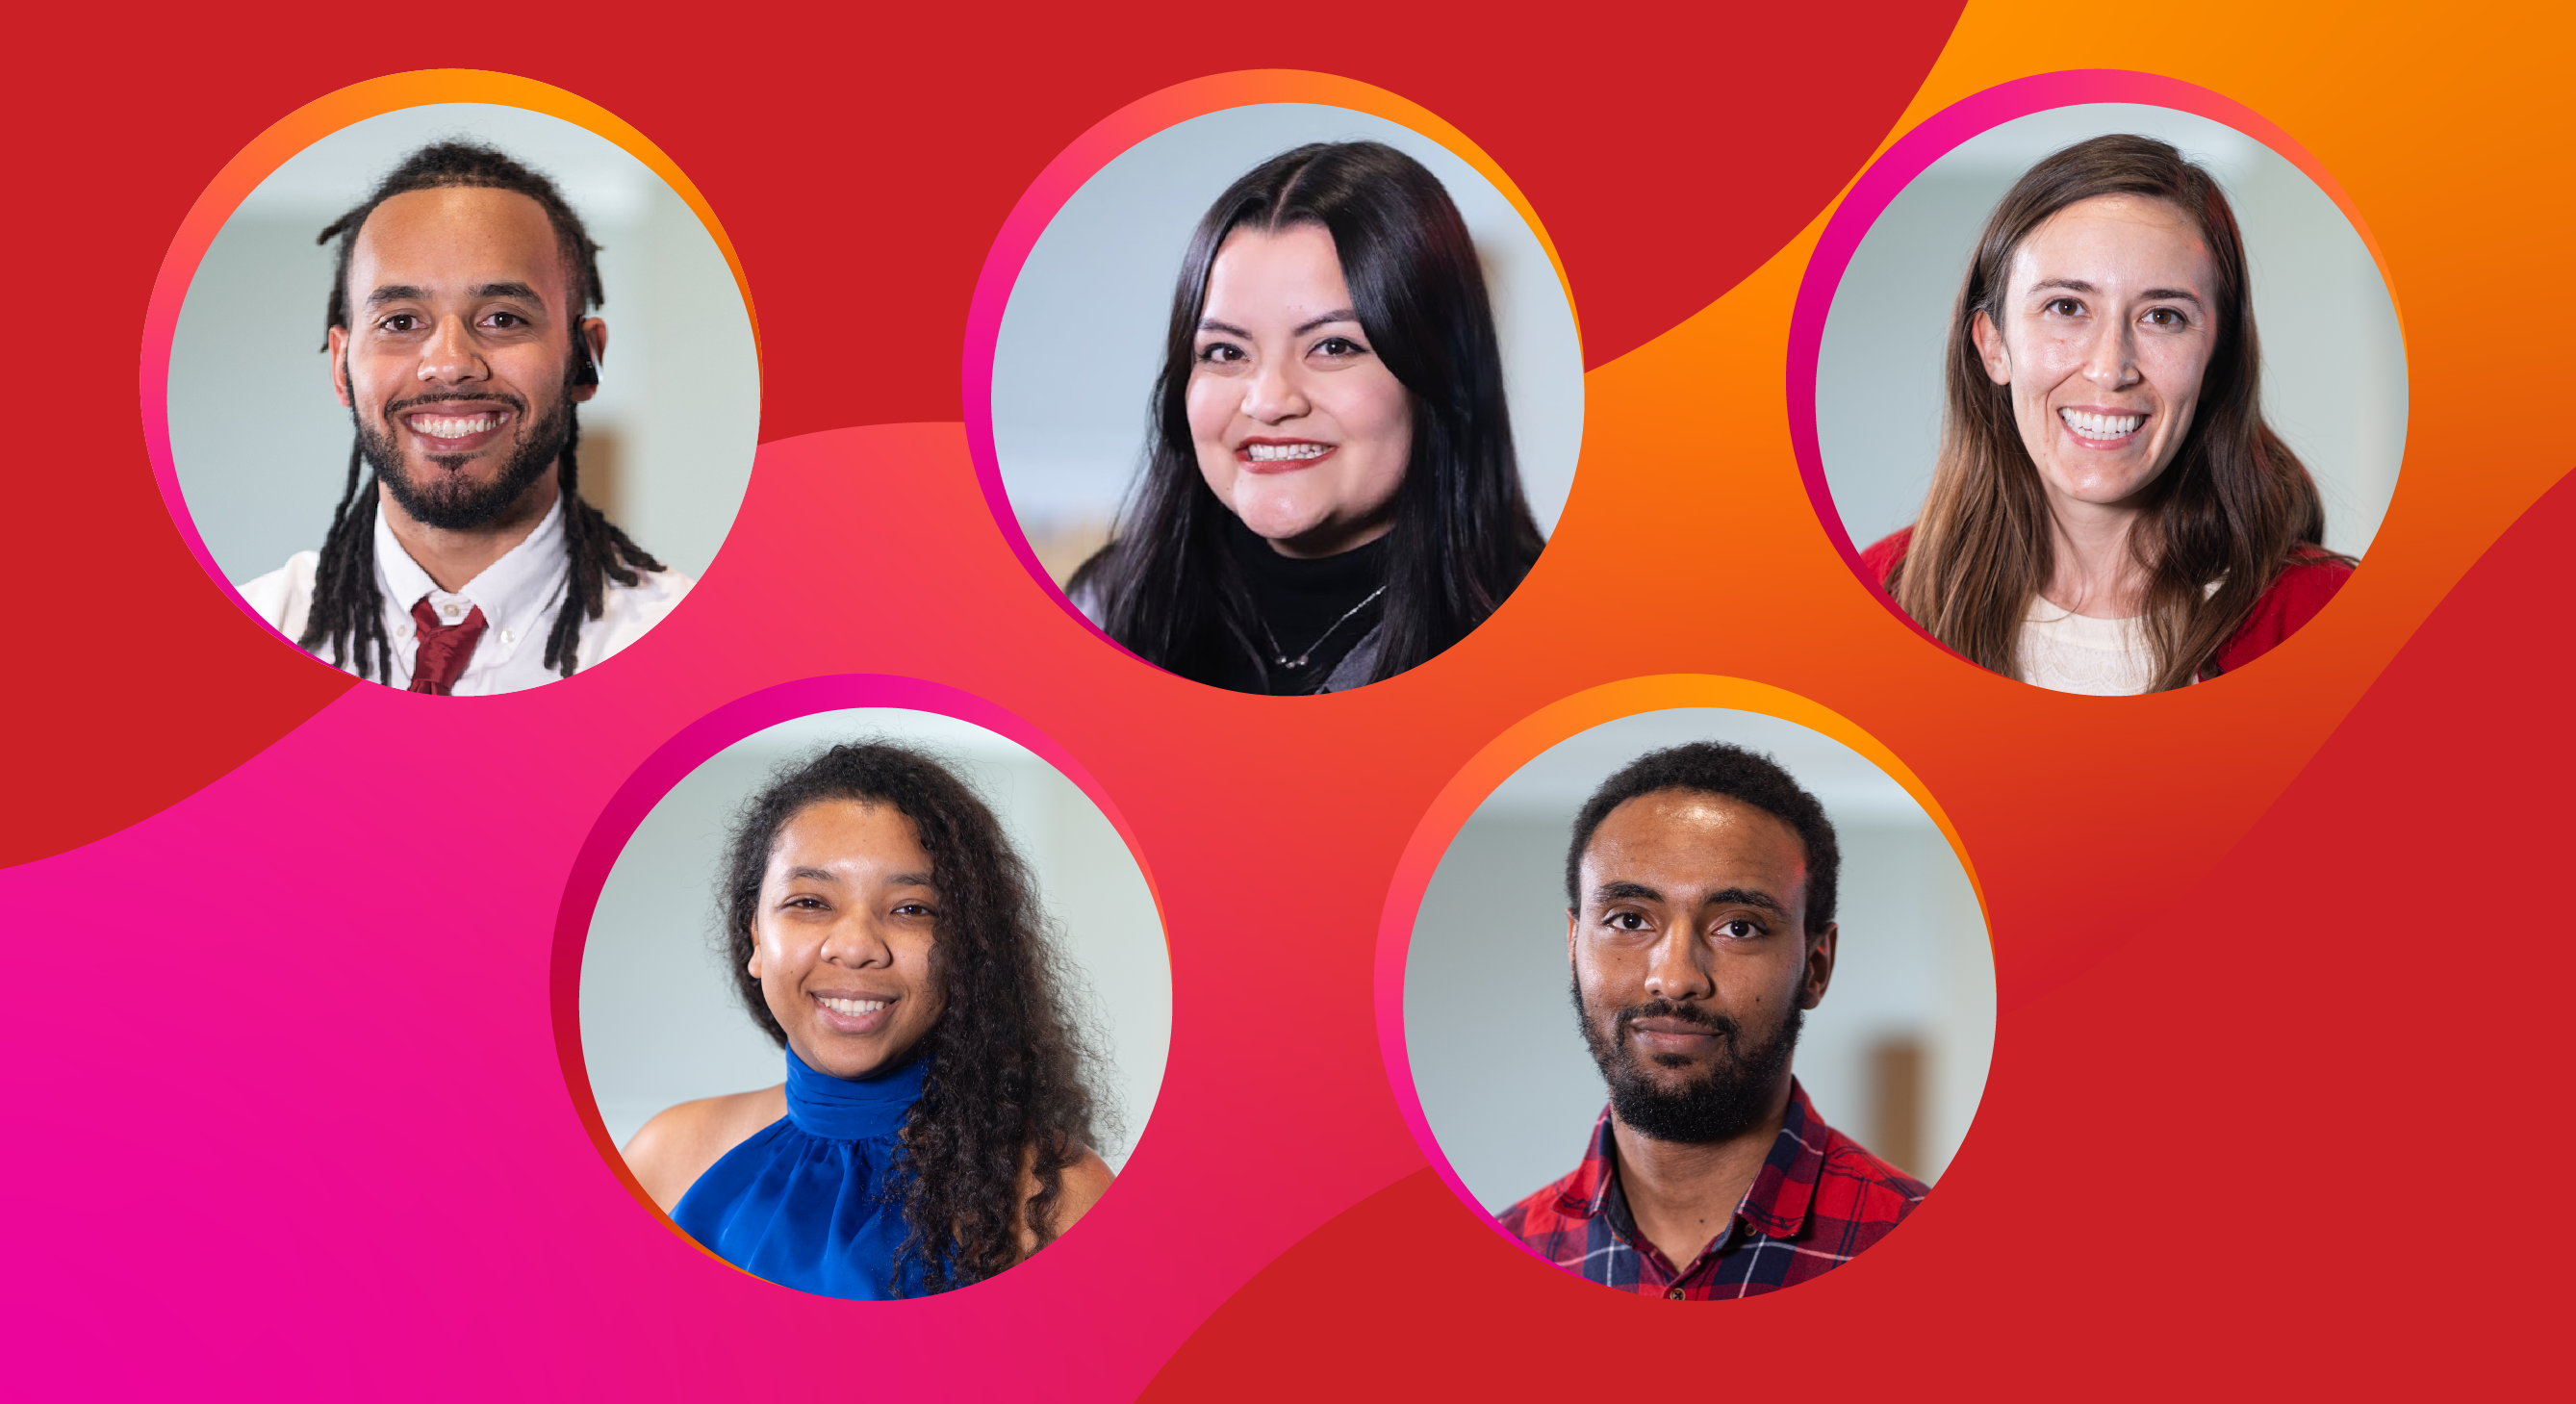 Five team member headshots in round frames on a red, pink and orange background.